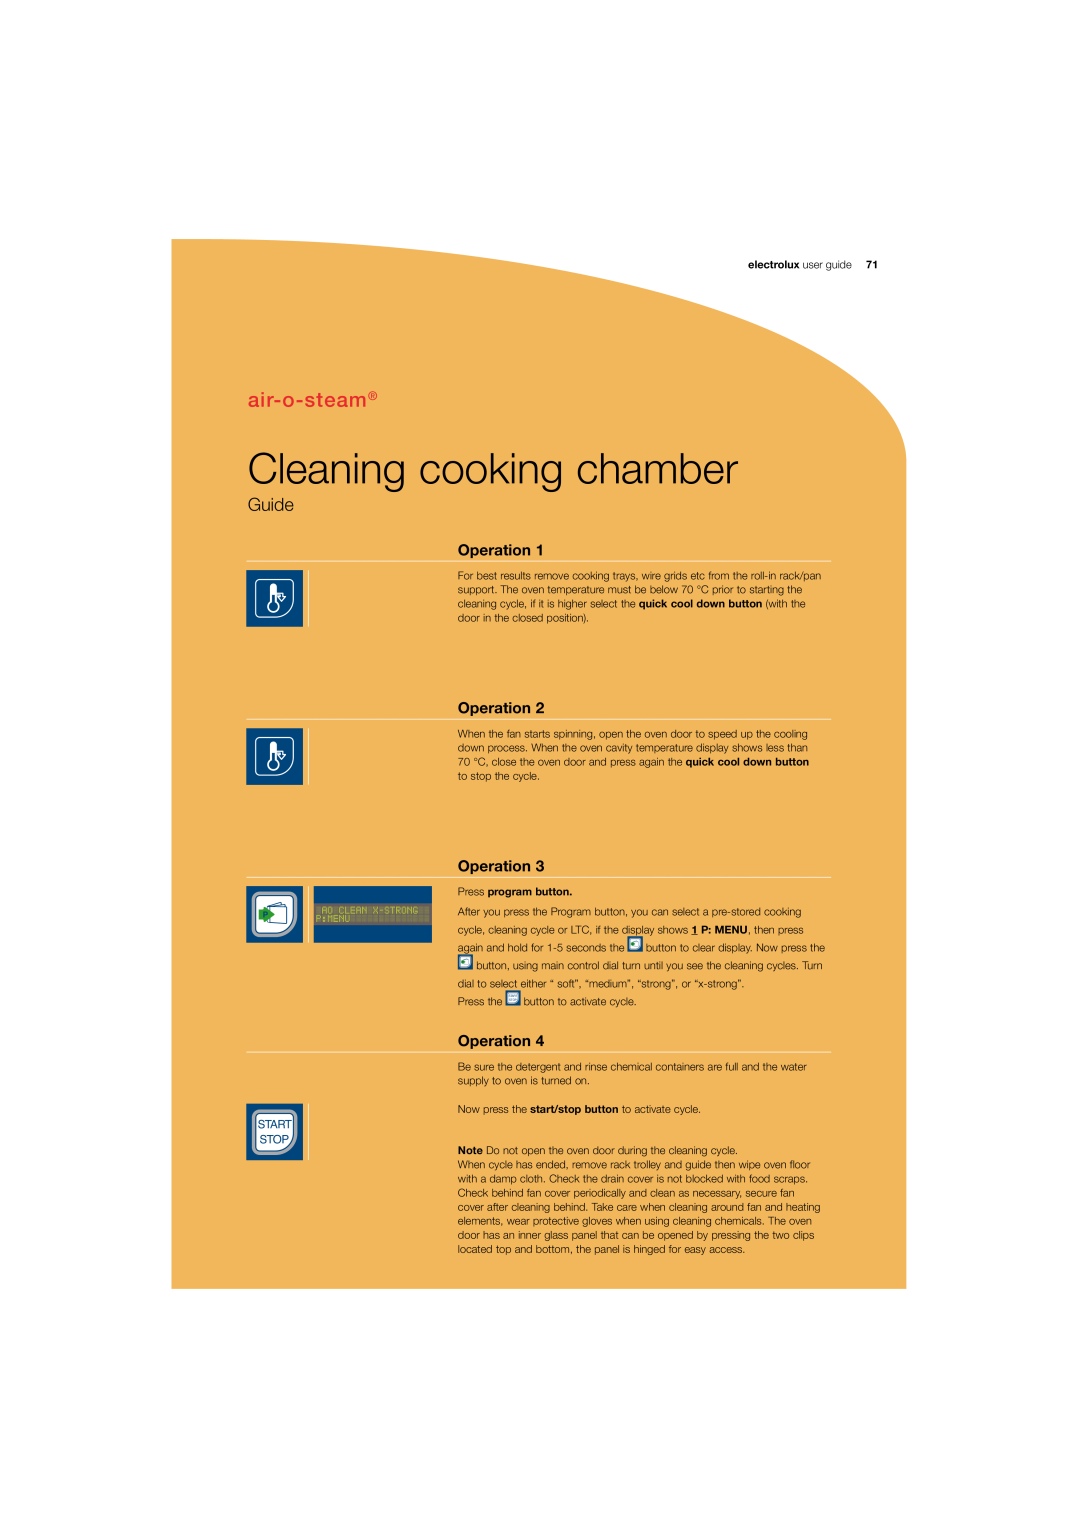 Electrolux 180 manual Cleaning cooking chamber, air-o-steam, Guide, Operation, Start Stop, electrolux user guide 